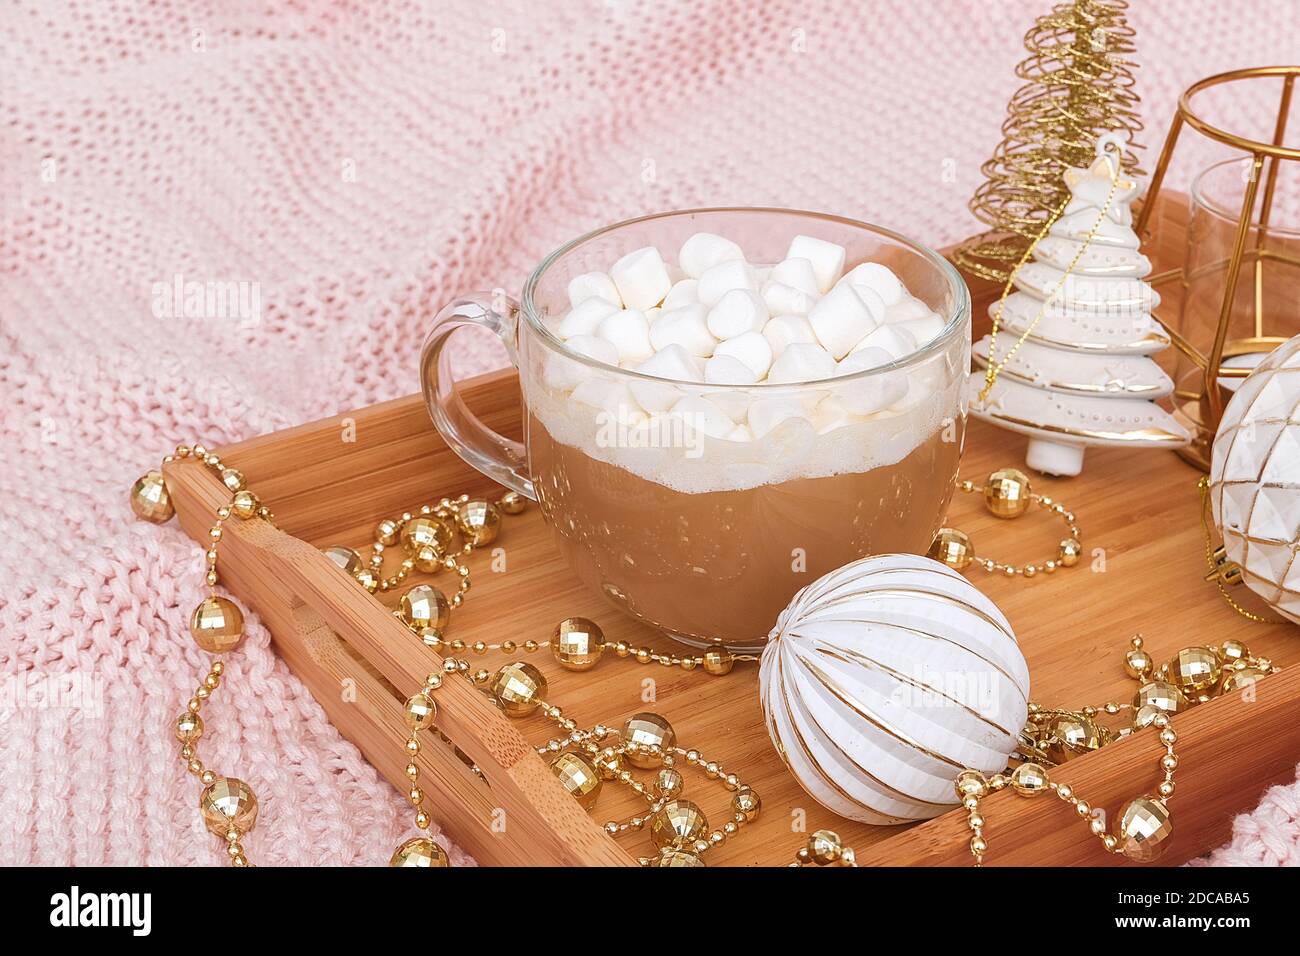 Wooden tray with cup of cocoa, marshmallows and christmas decorations on warm knitted pink plaid. Xmas or New year good morning concept. Stock Photo